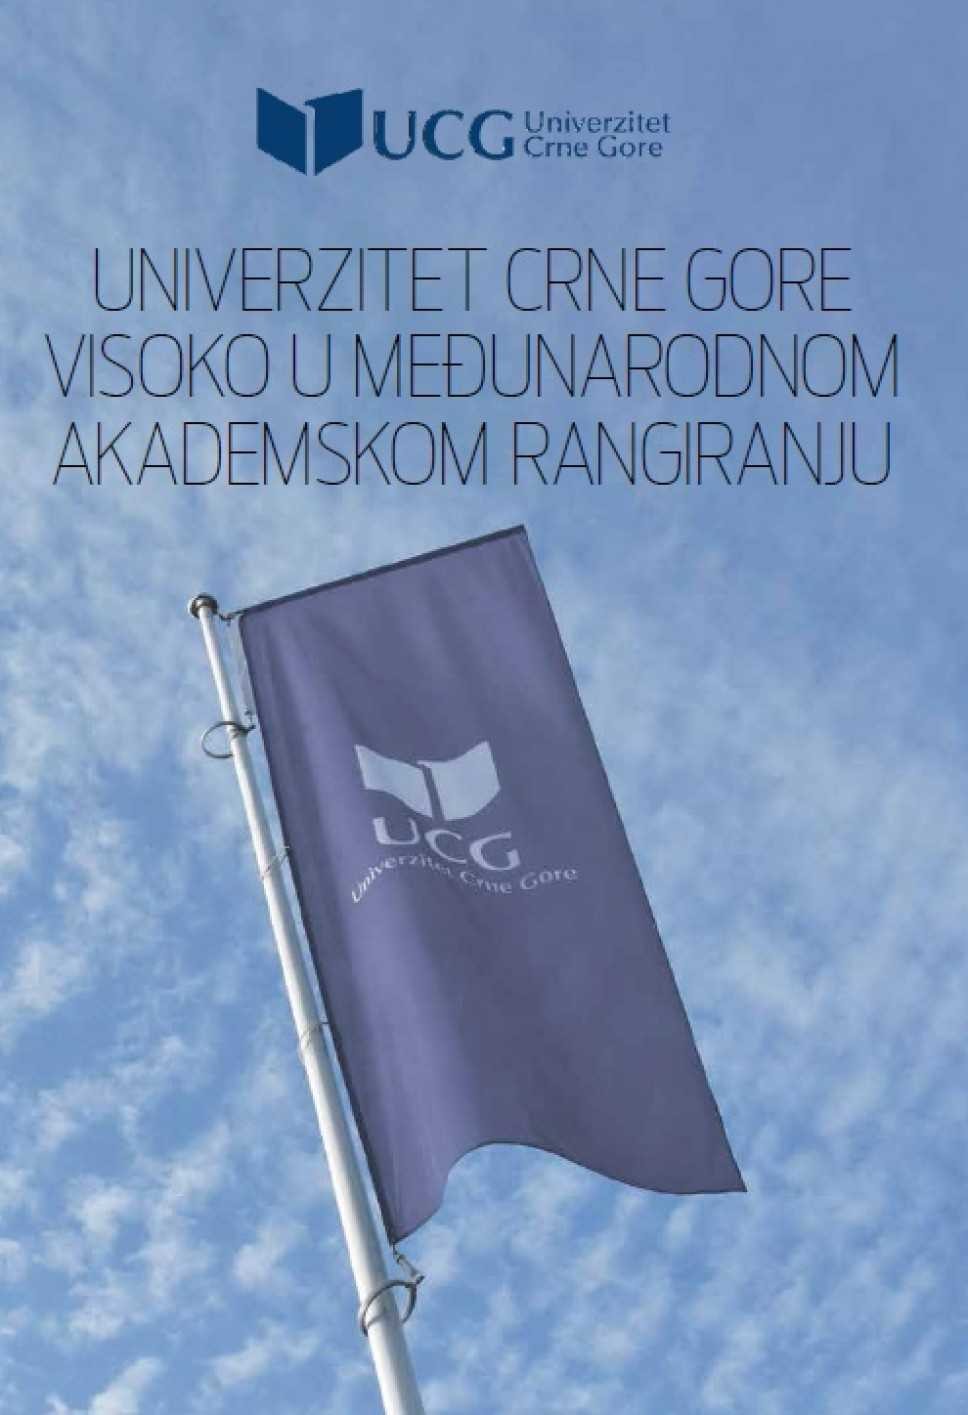 University of Montenegro high within the international academic ranking lists, special edition